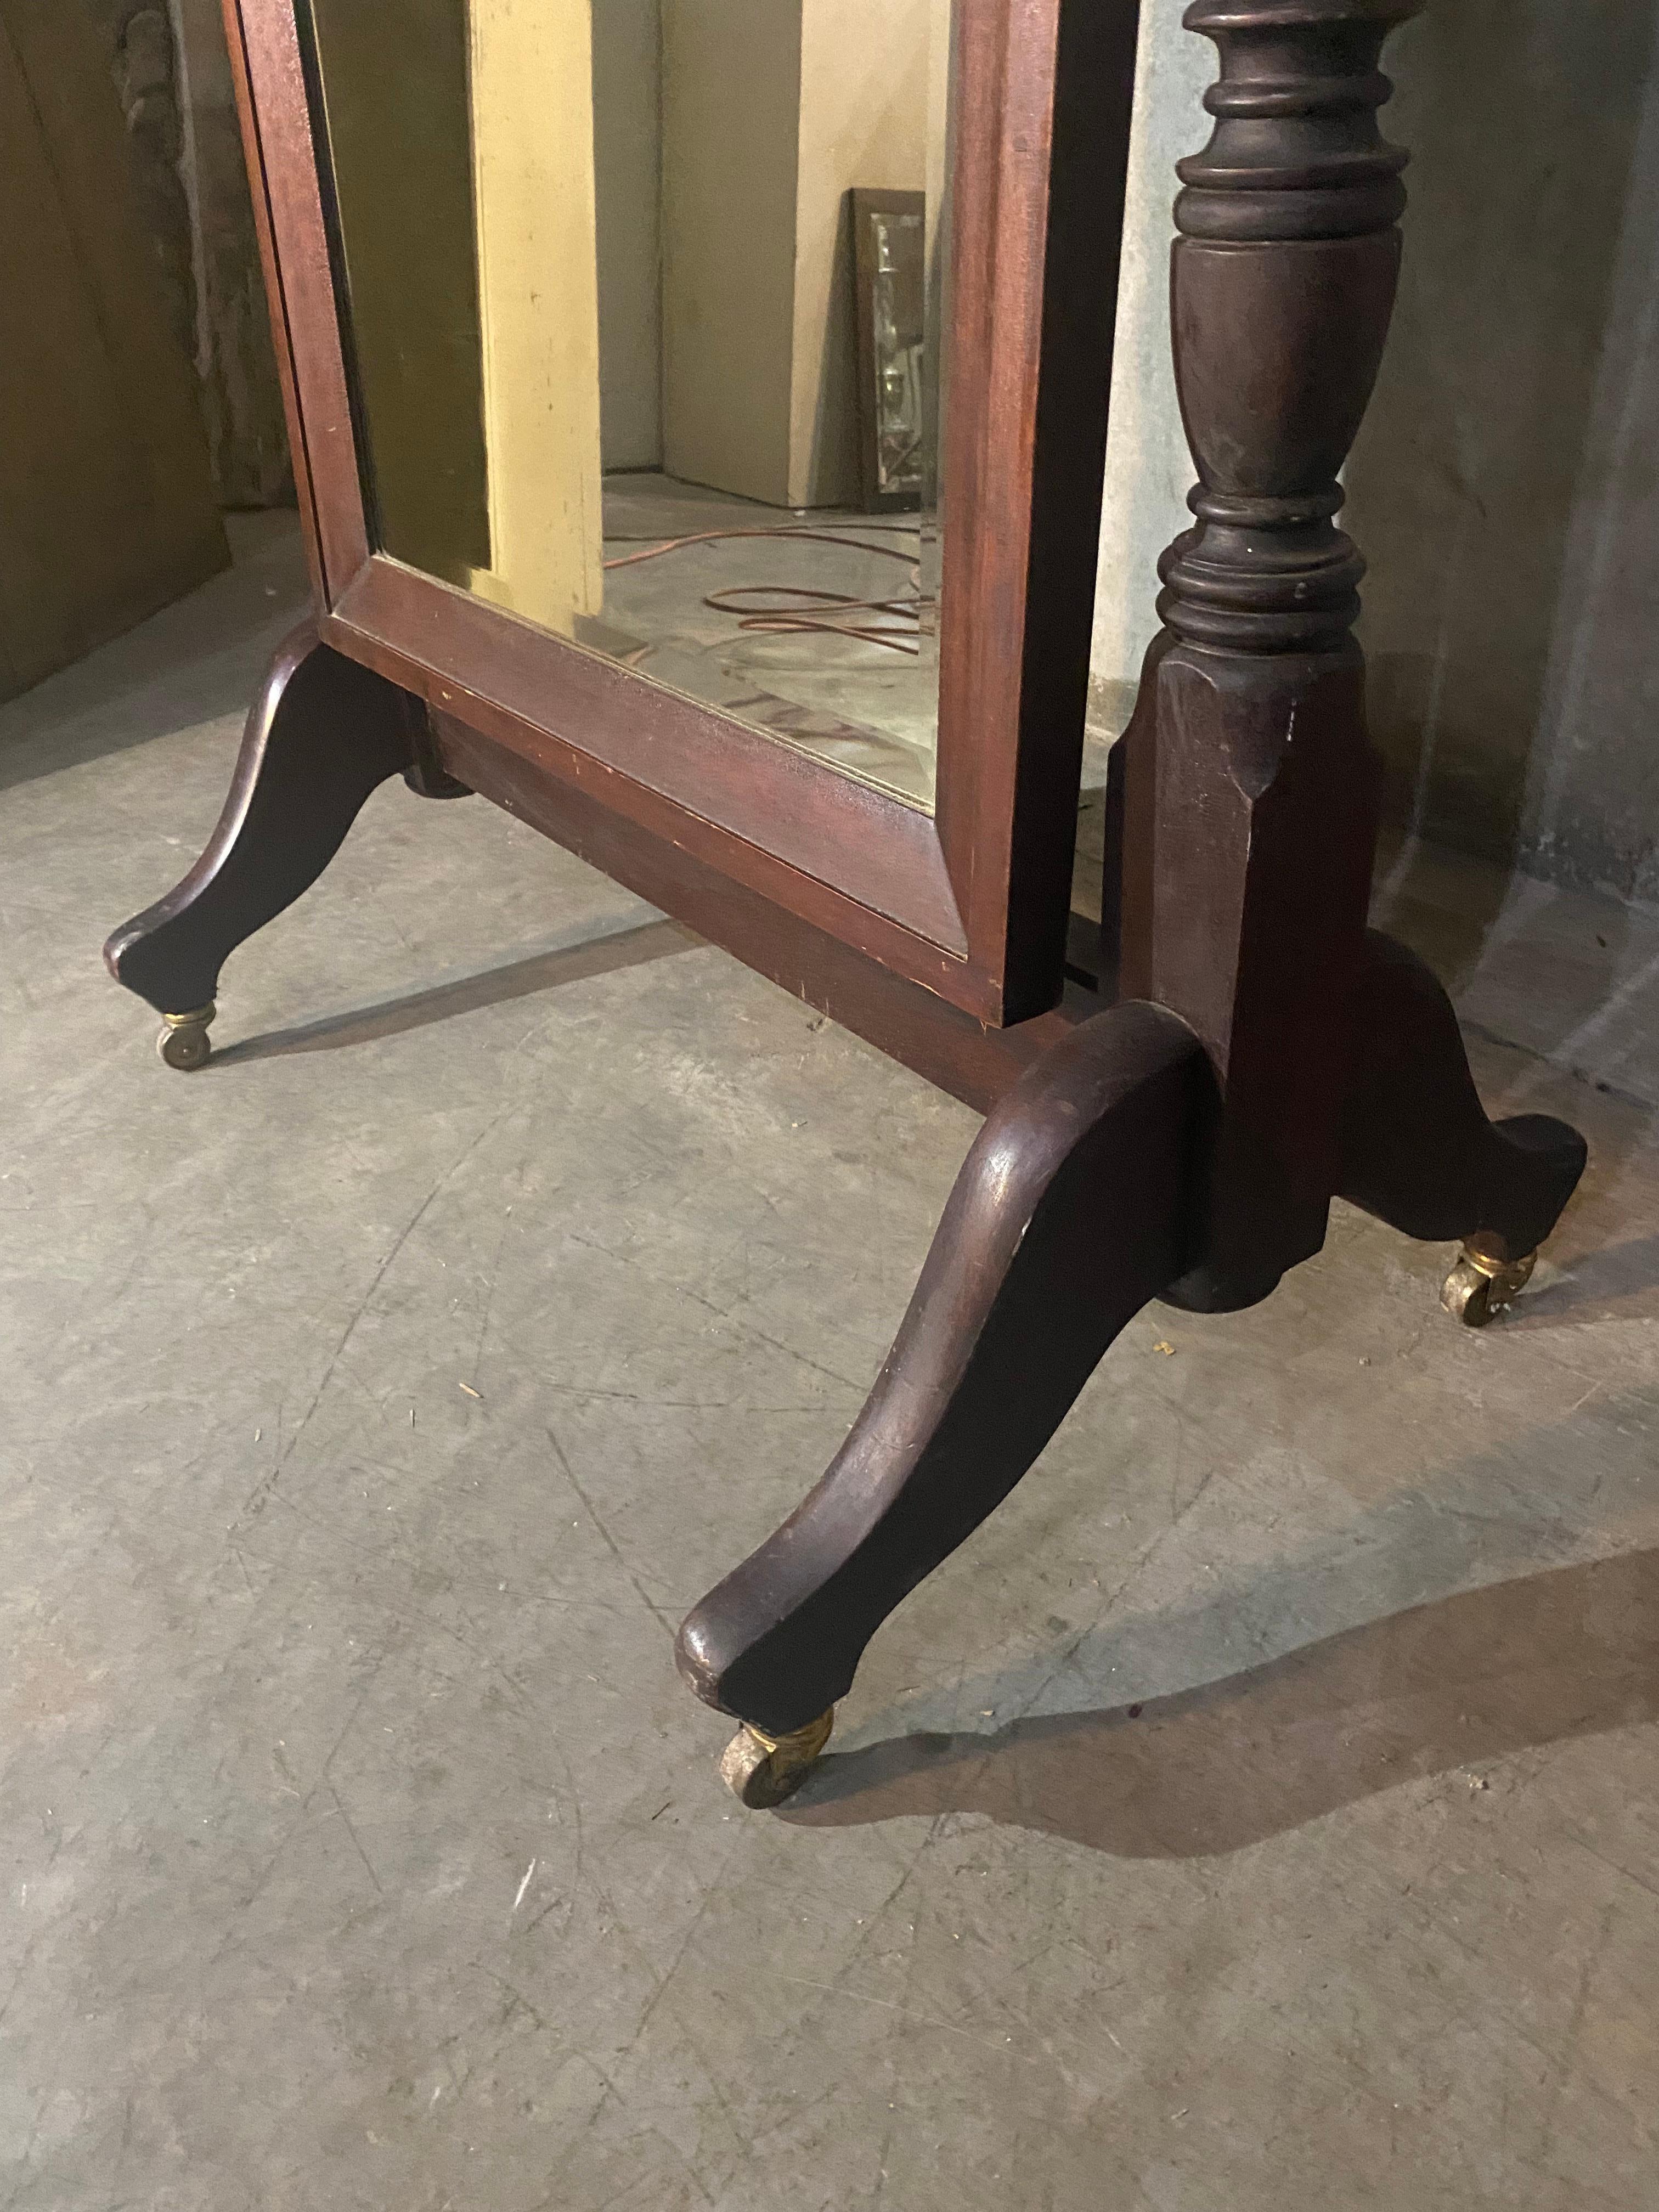 A wonderful untouched example showing original finish, bevelled original mirror curved corners and brass details. 

Acquired from a private collection.